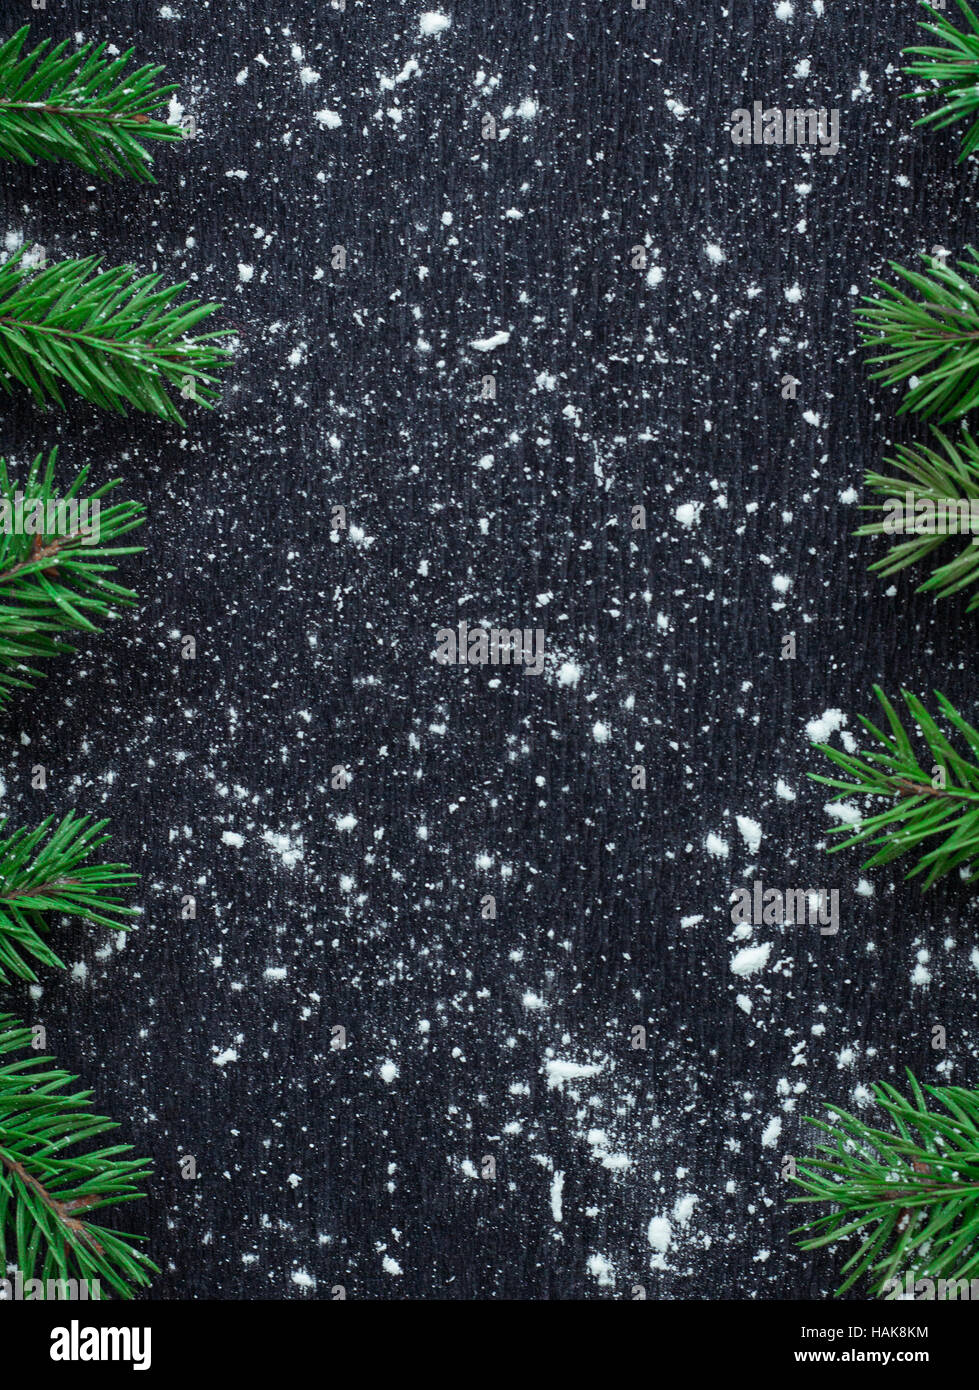 Christmas and New Year winter holiday snowbound black space background with green fir tree branches Stock Photo